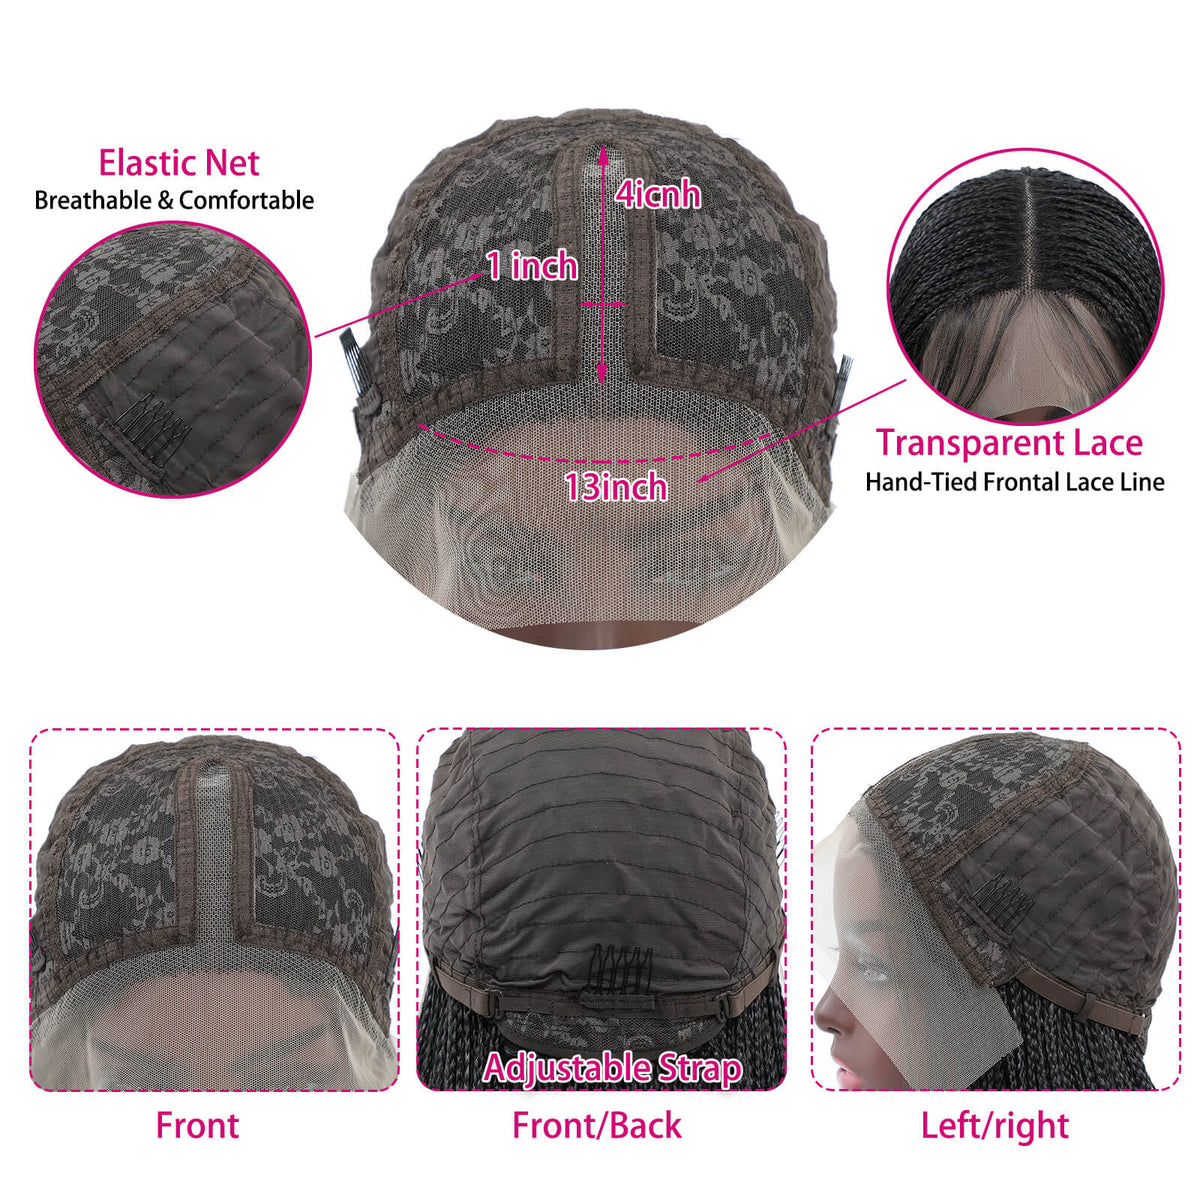 Box Braided Lace Front Wigs for Black Women Wig Cap Design Details